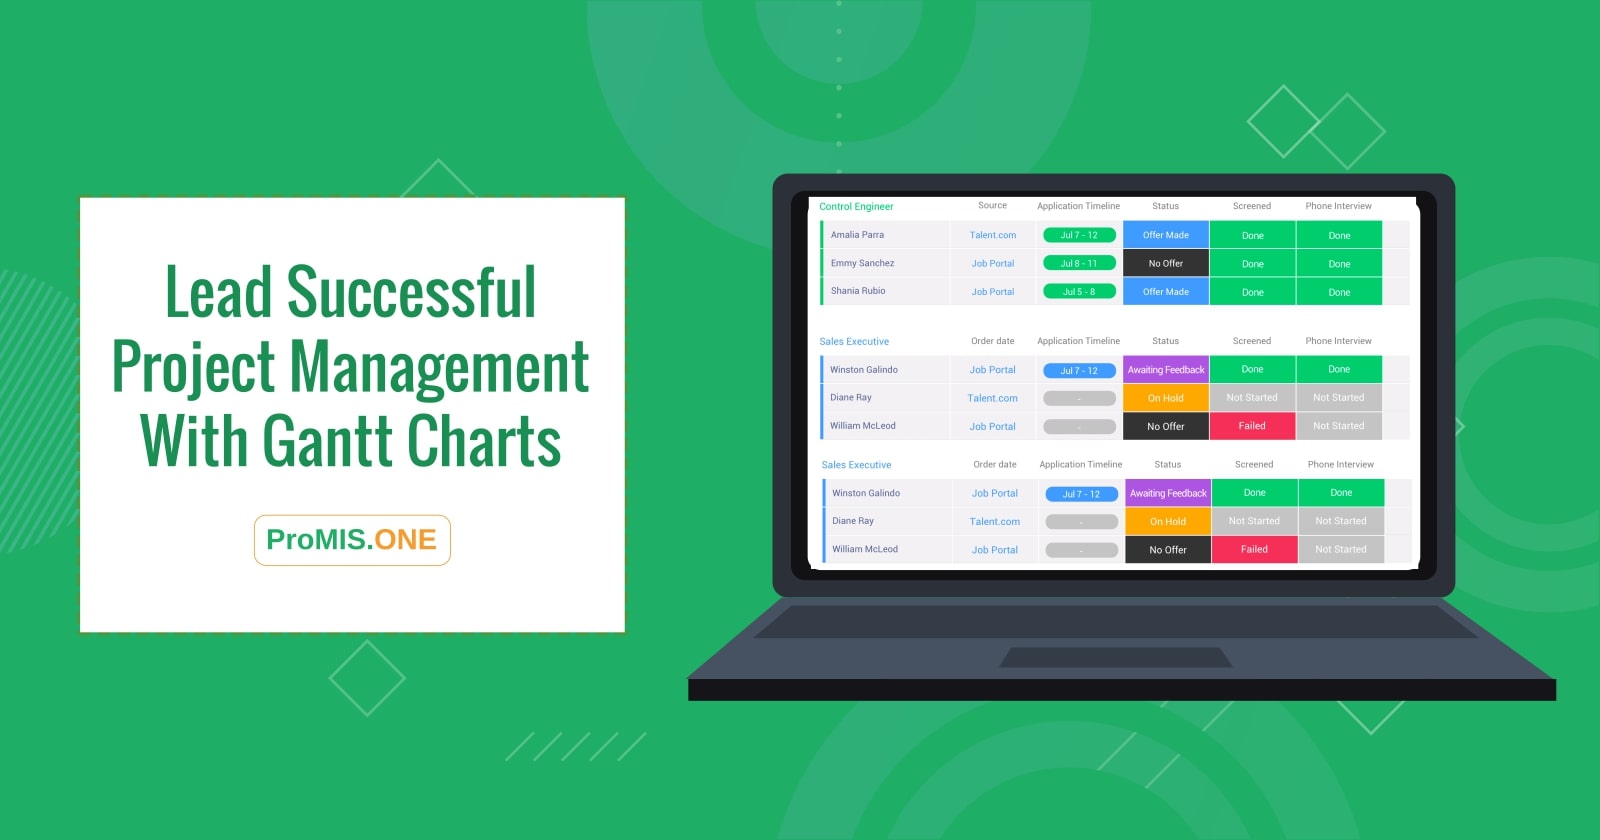 Lead Successful Project Management With Gantt Charts